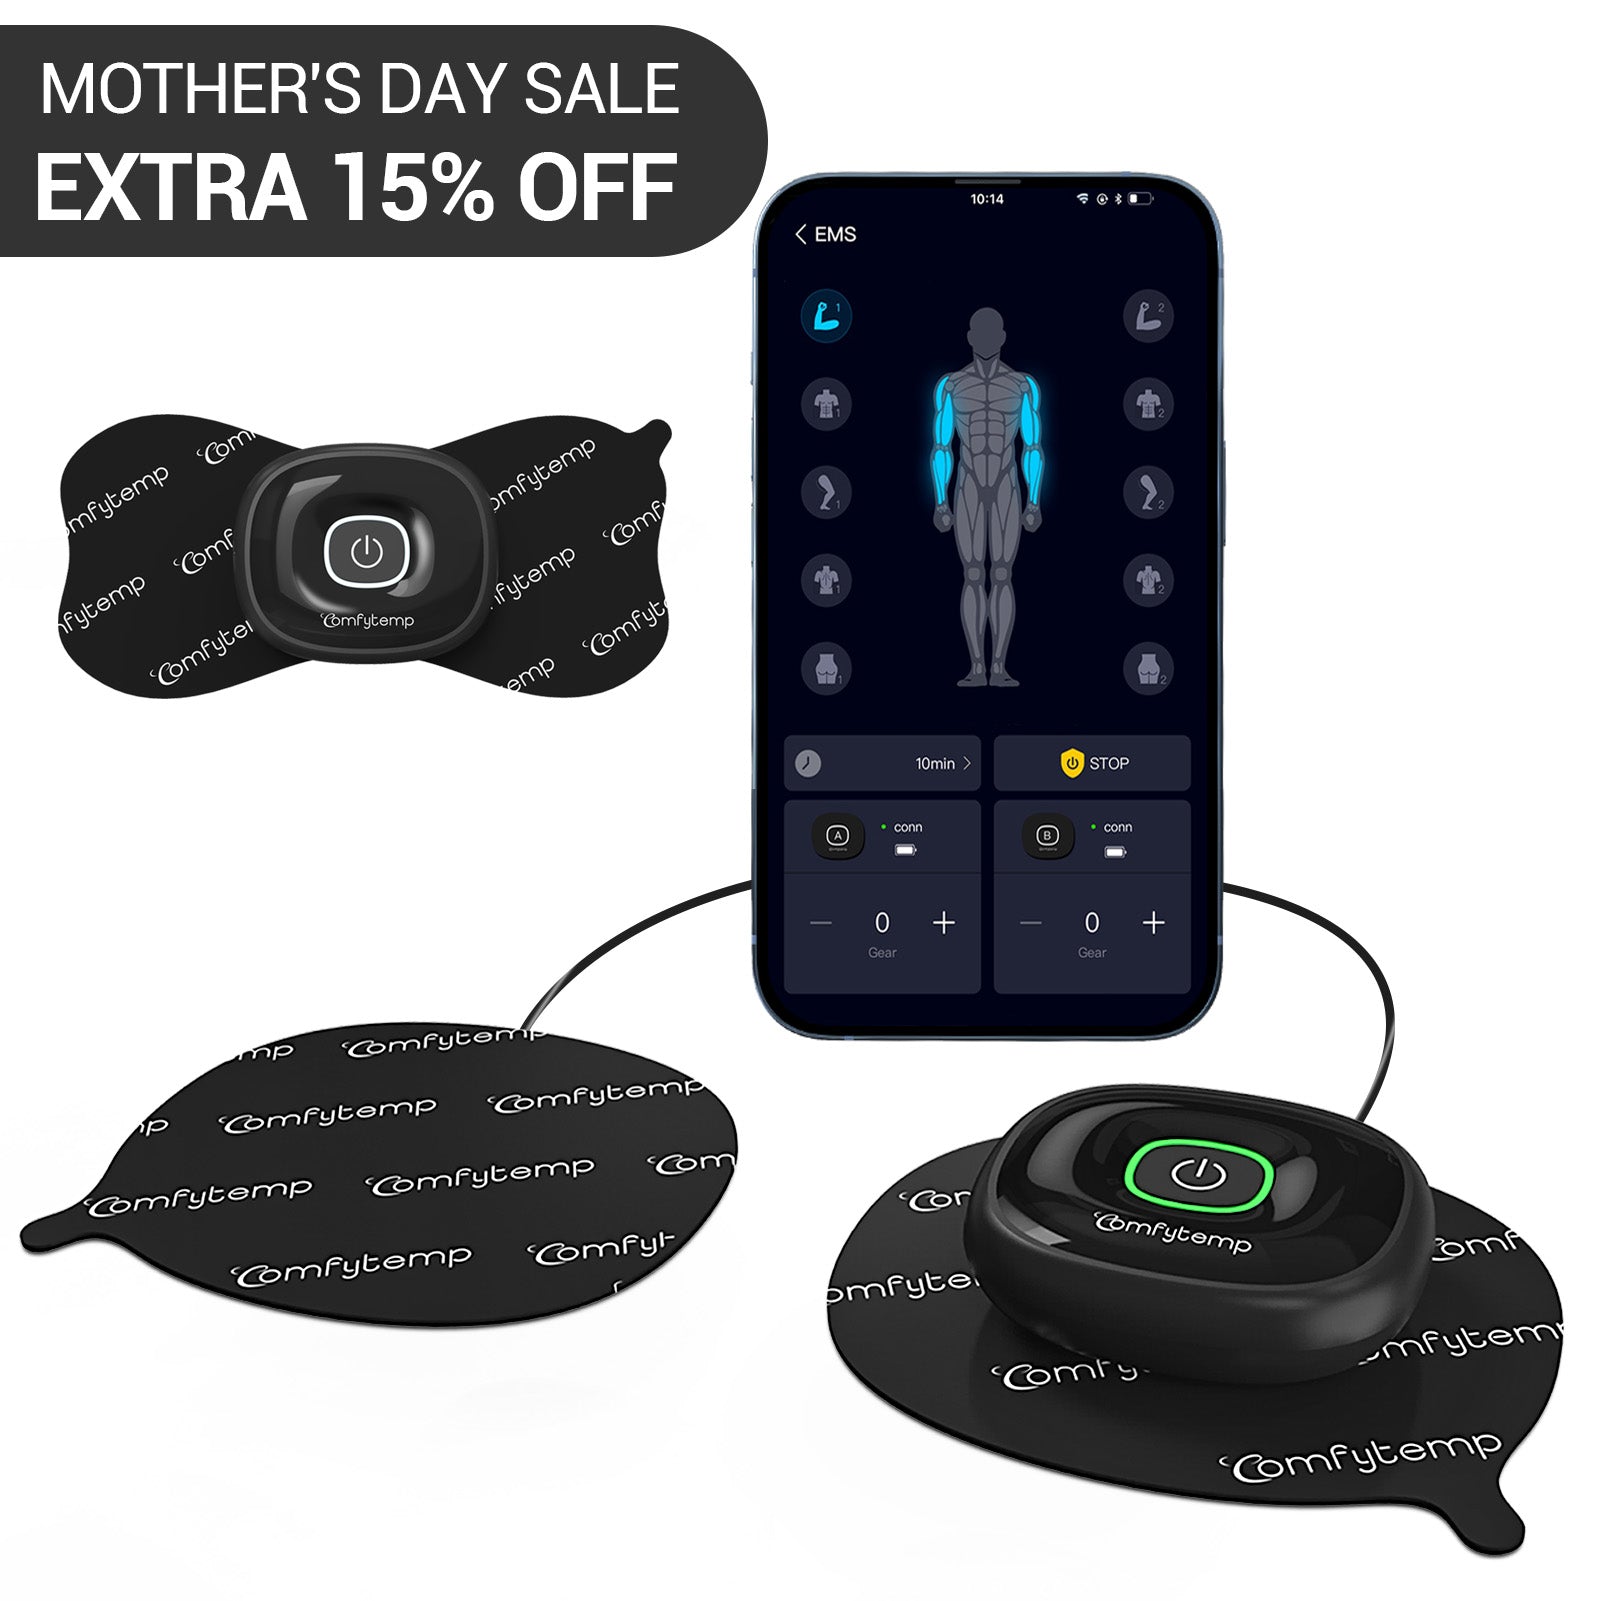 Comfytemp Wireless TENS Unit Muscle Stimulator with APP🔥Mother's Day Specials🔥